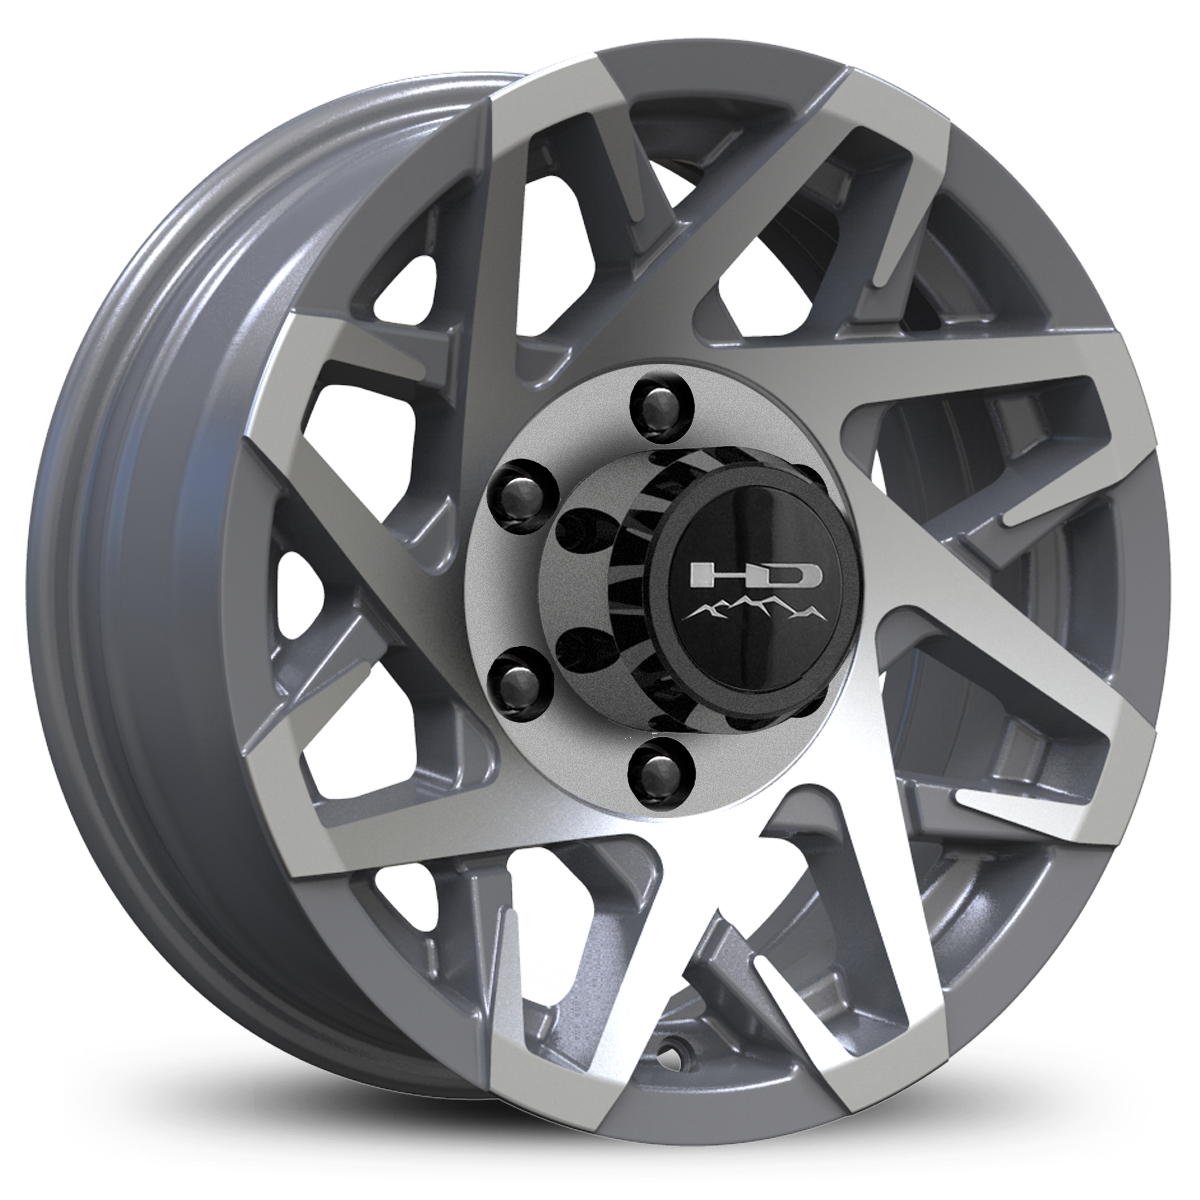 HD Off-Road Canyon Custom Trailer Wheel Rims in 16x6.0 16x6 Gloss Gunmetal Machined Face with Center Cap & Logo fits 6x139.7 / 6x5.50 Axle Boat, Car, RV, Travel, Concession, Horse, Utility, Lawn & Garden, & Landscaping.